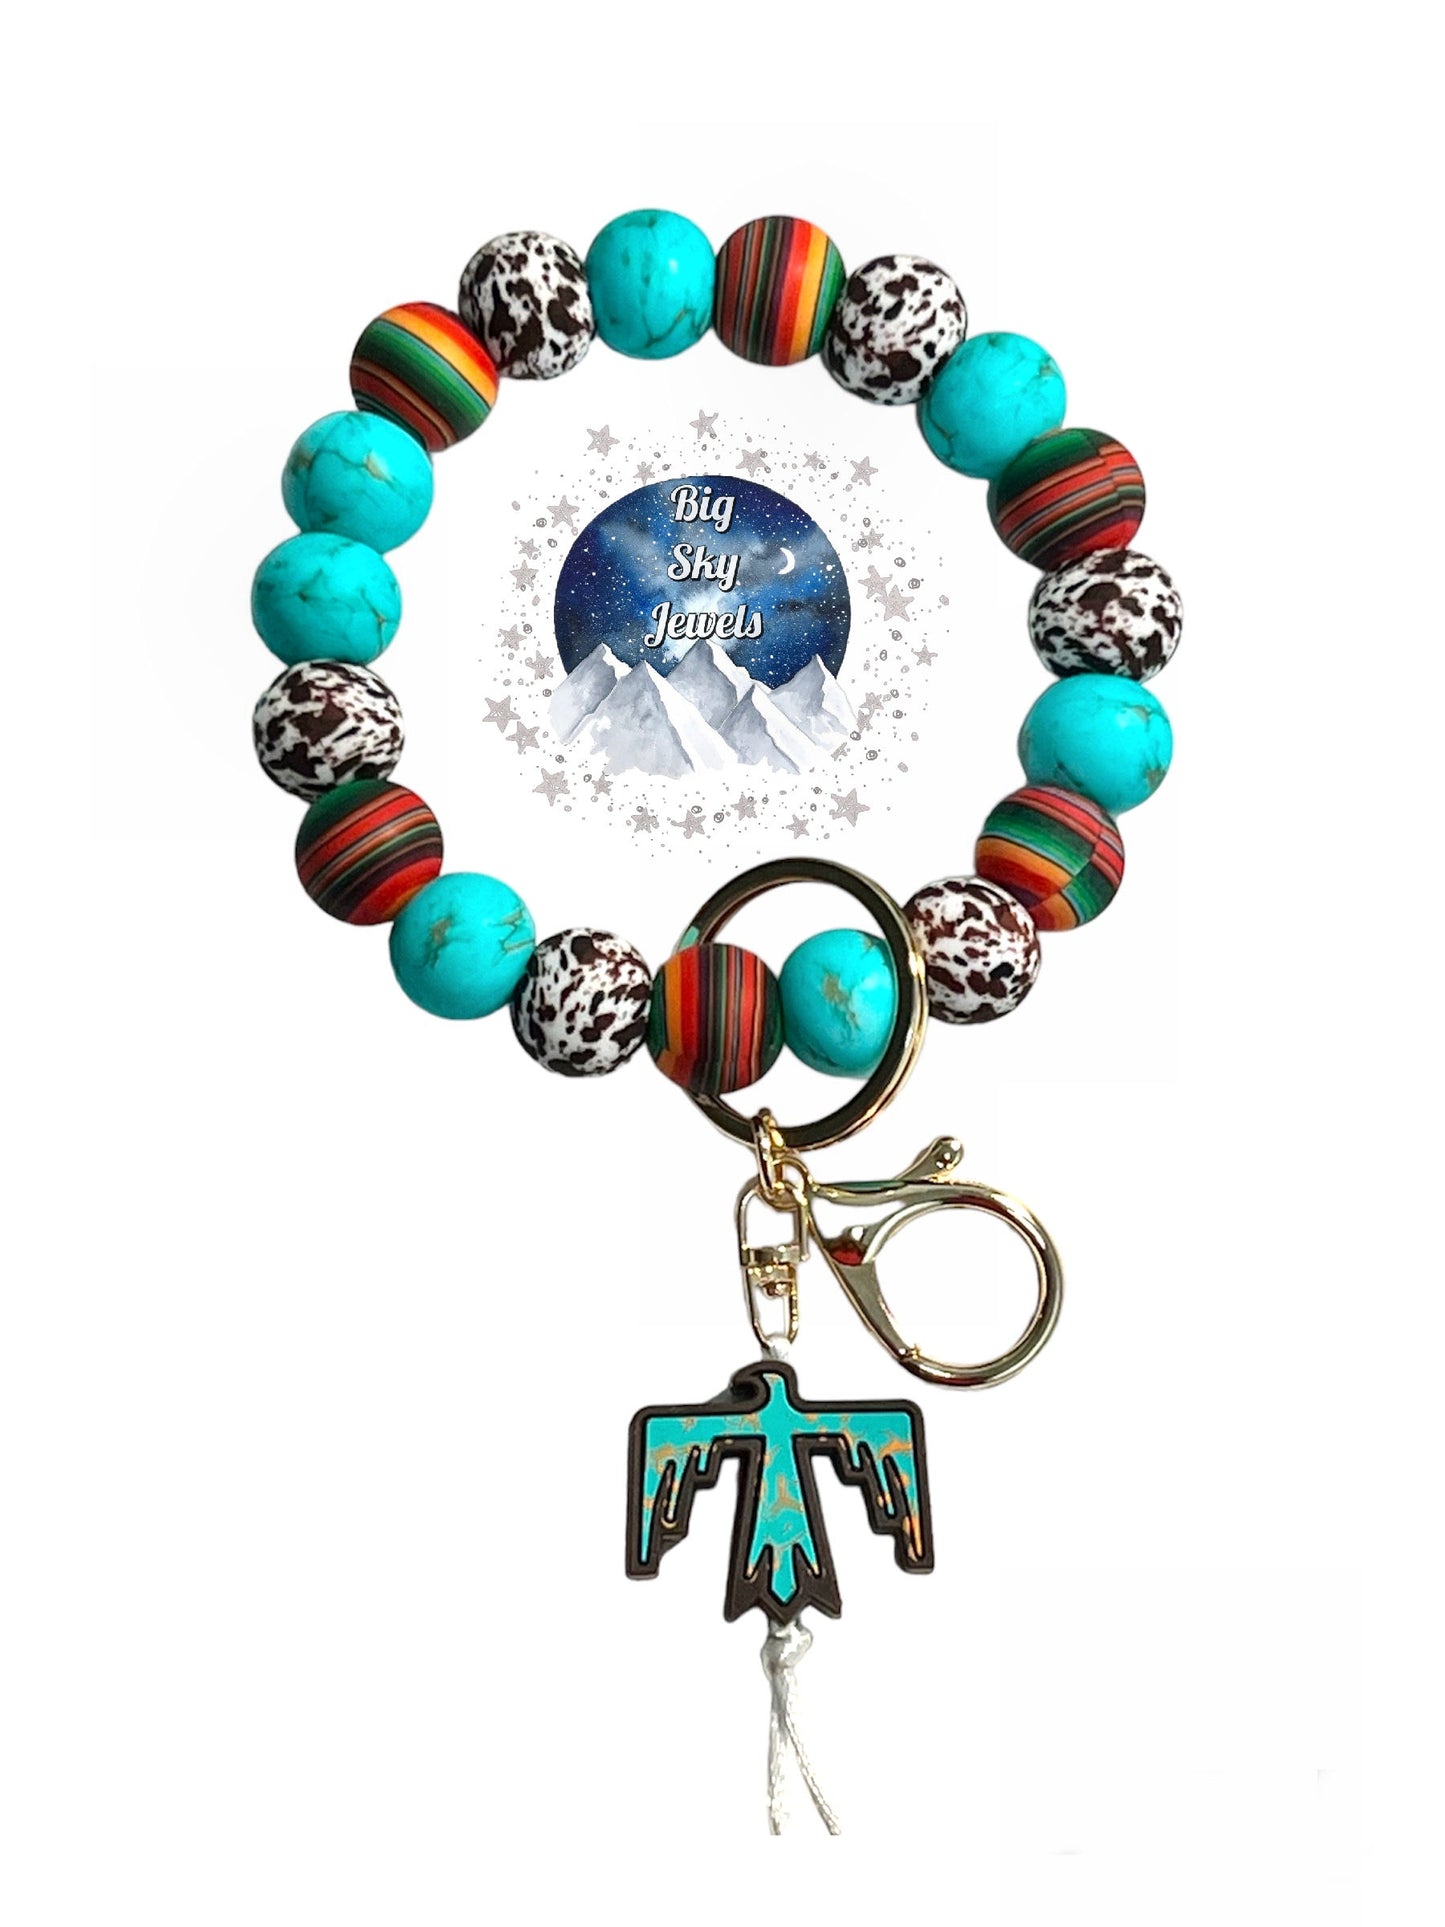 South Western Thunderbird Wristlet Keychain Silicone Serape, Turquoise Stone, & Brown Cow, Ages 8+ Kids or Ladies Moms West